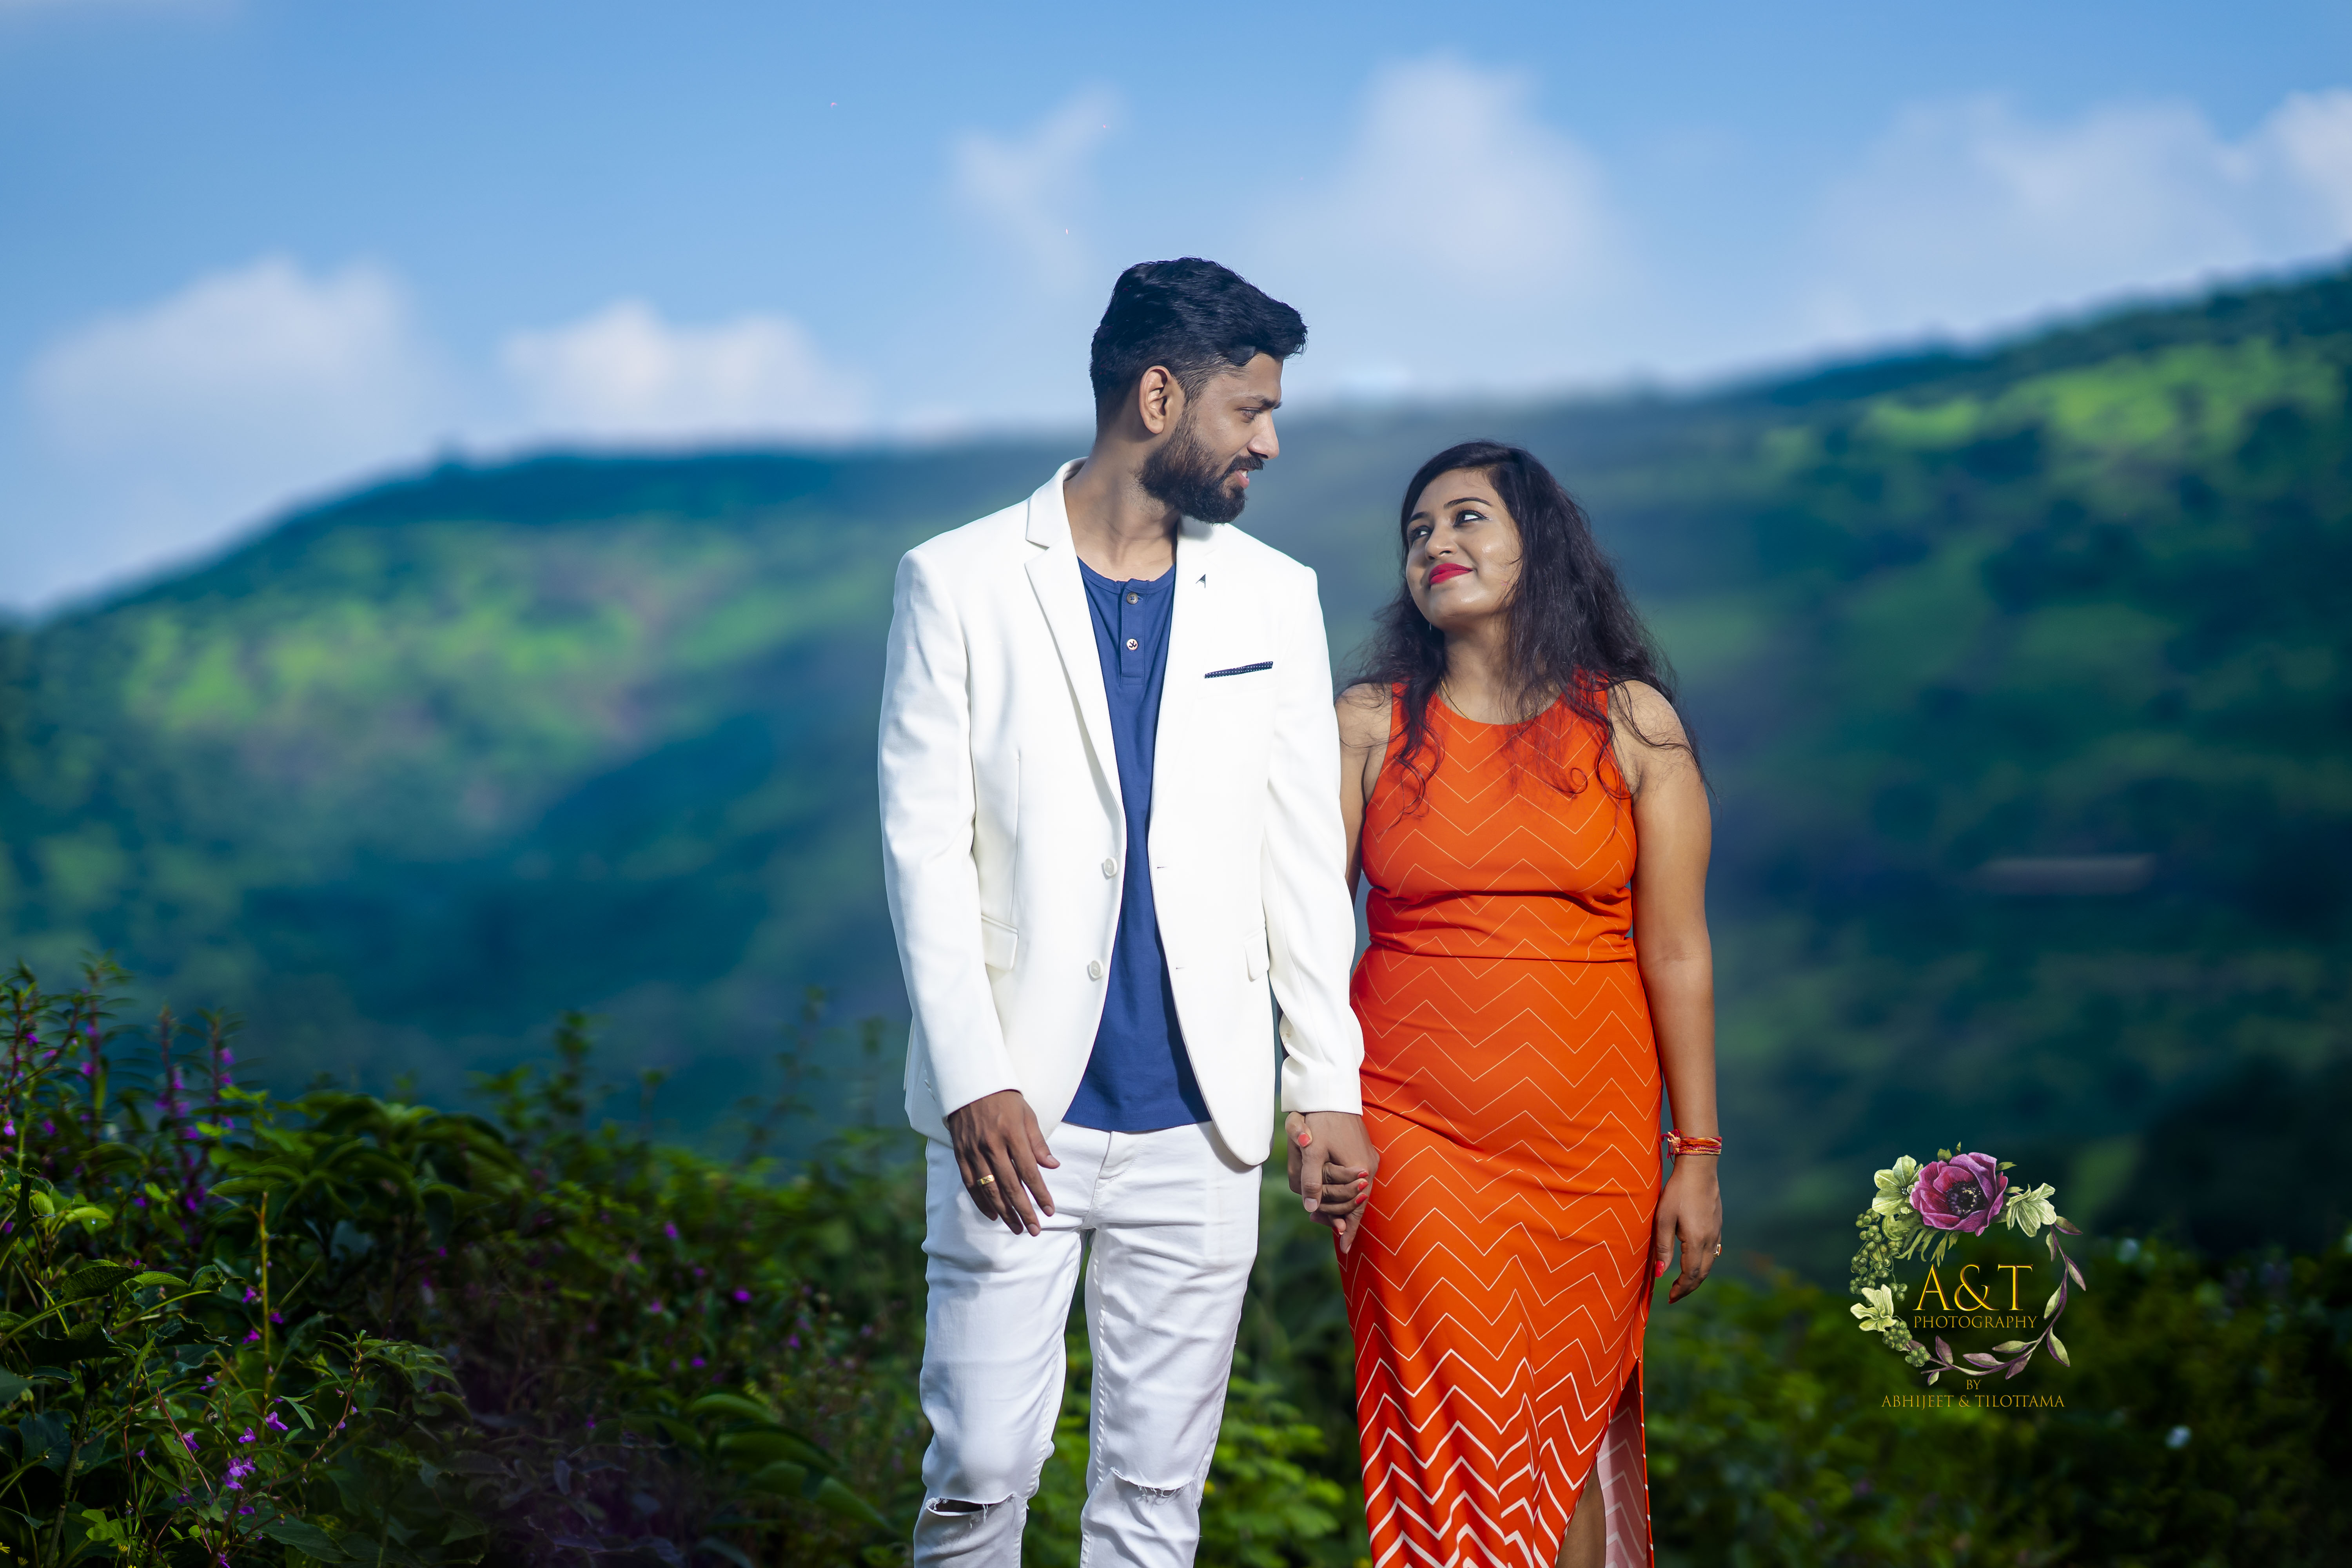 This shoot is showing us the best hand in hand walk of Nirbhay & Manisha at their Pre-Wedding Photoshoot in Lonawala.